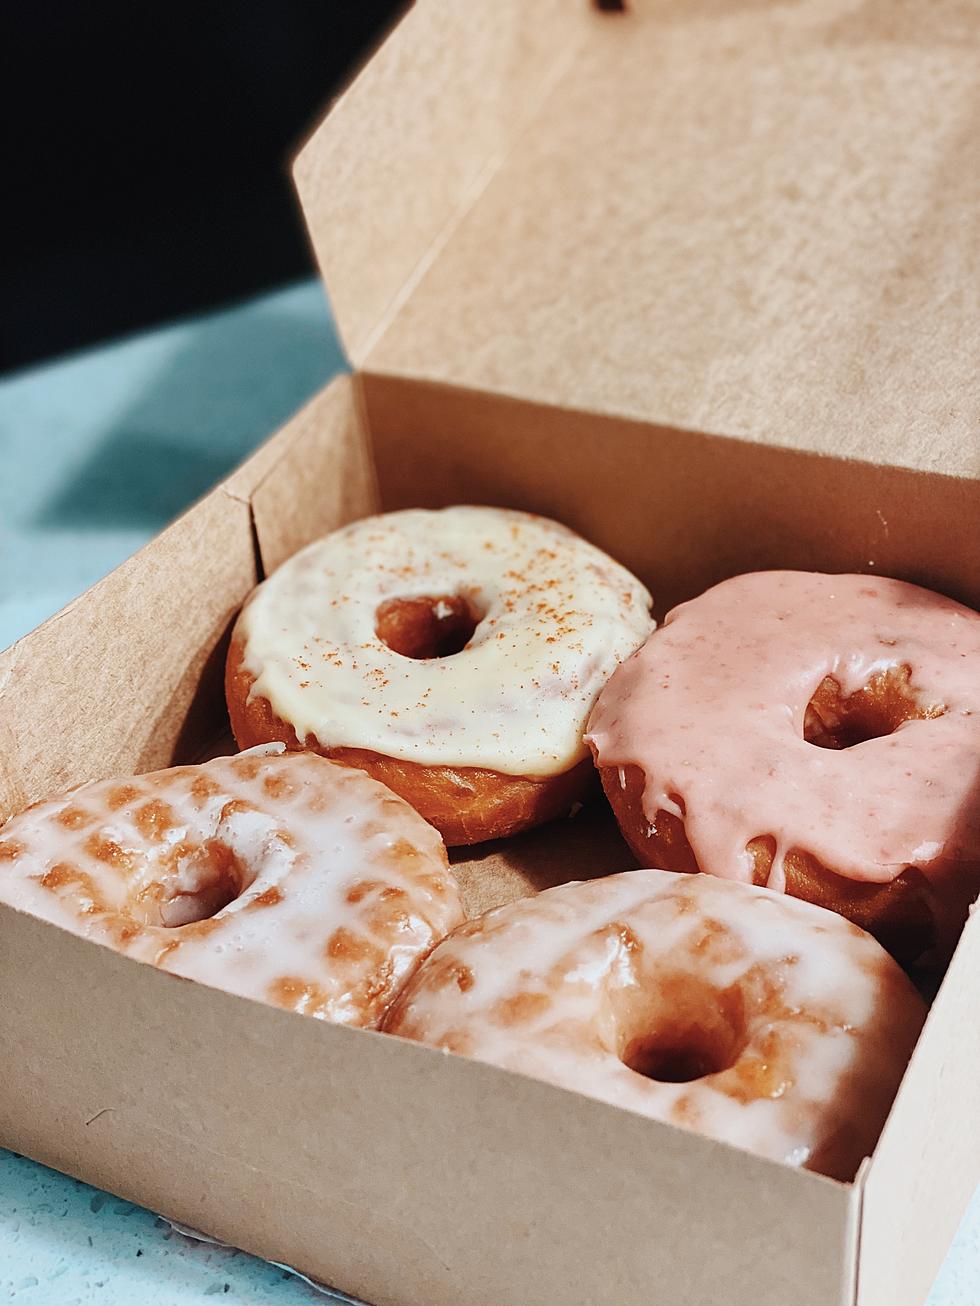 Here’s Where To Find The Absolute Best Donuts In Lubbock And Beyond